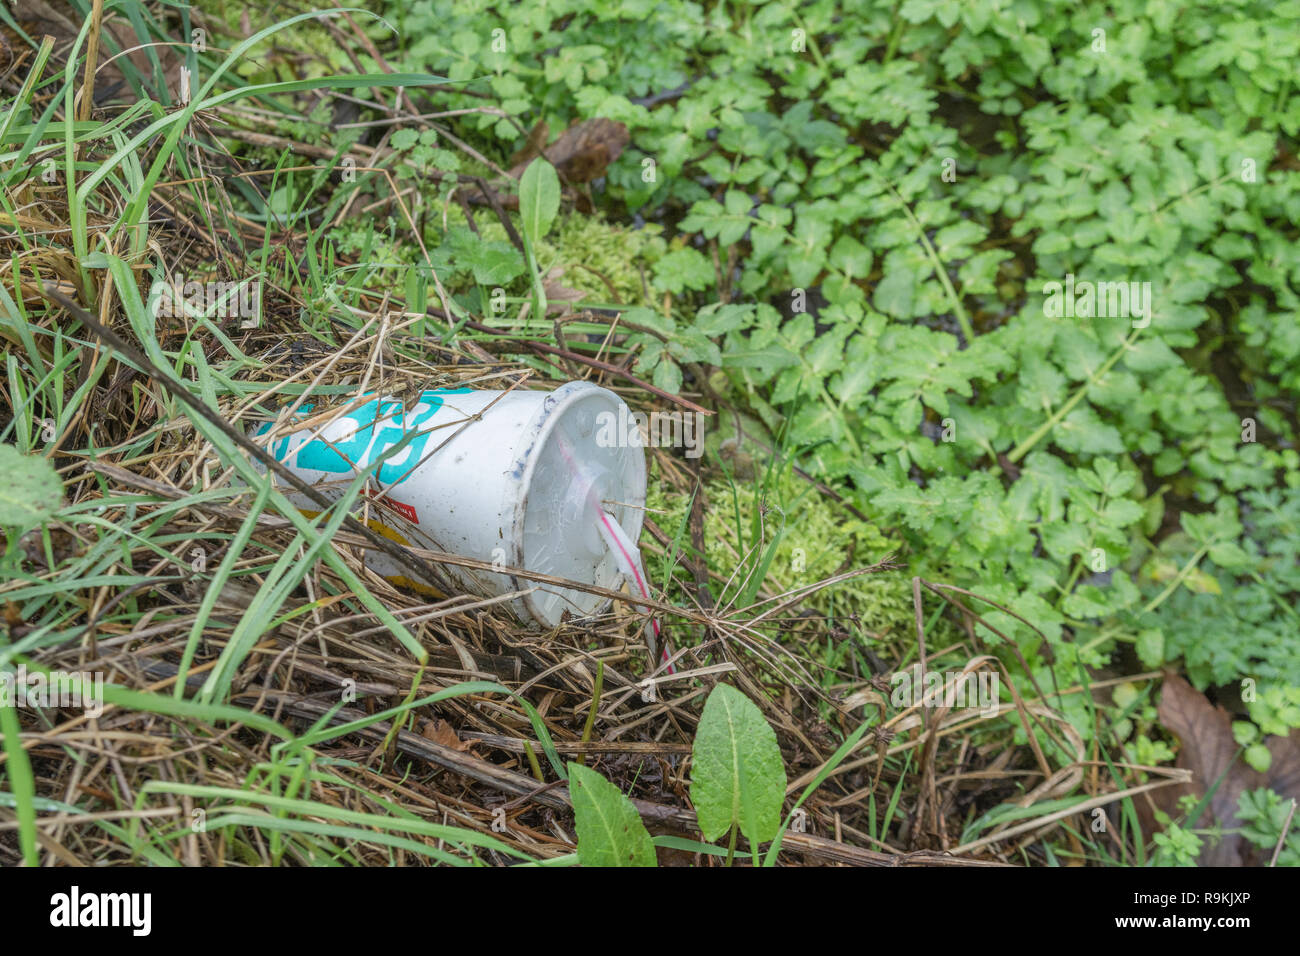 Takeaway coffee cup discarded in rural hedgerow ditch. Metaphor plastic pollution, environmental pollution, war on plastic waste, plastic rubbish. Stock Photo